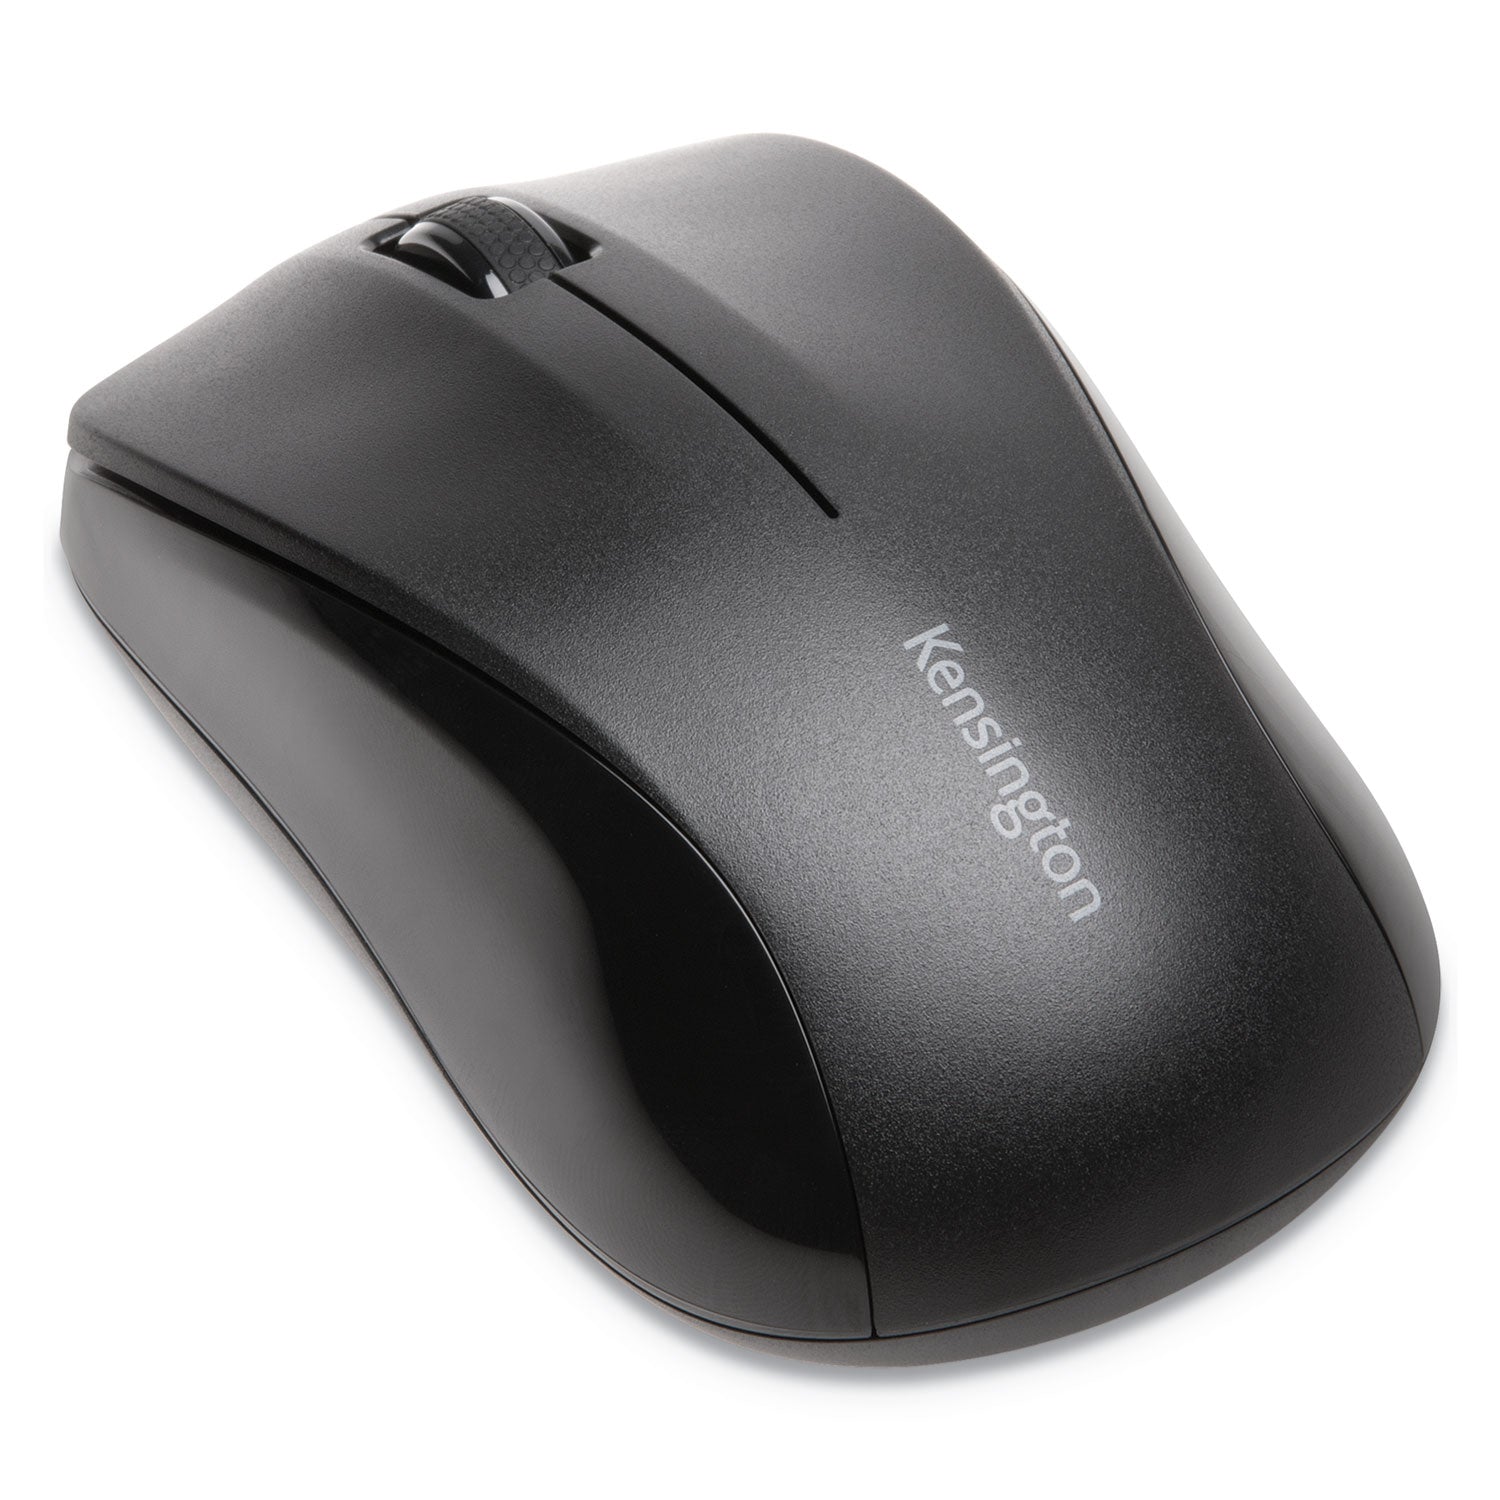 Wireless Mouse for Life, 2.4 GHz Frequency/30 ft Wireless Range, Left/Right Hand Use, Black - 2